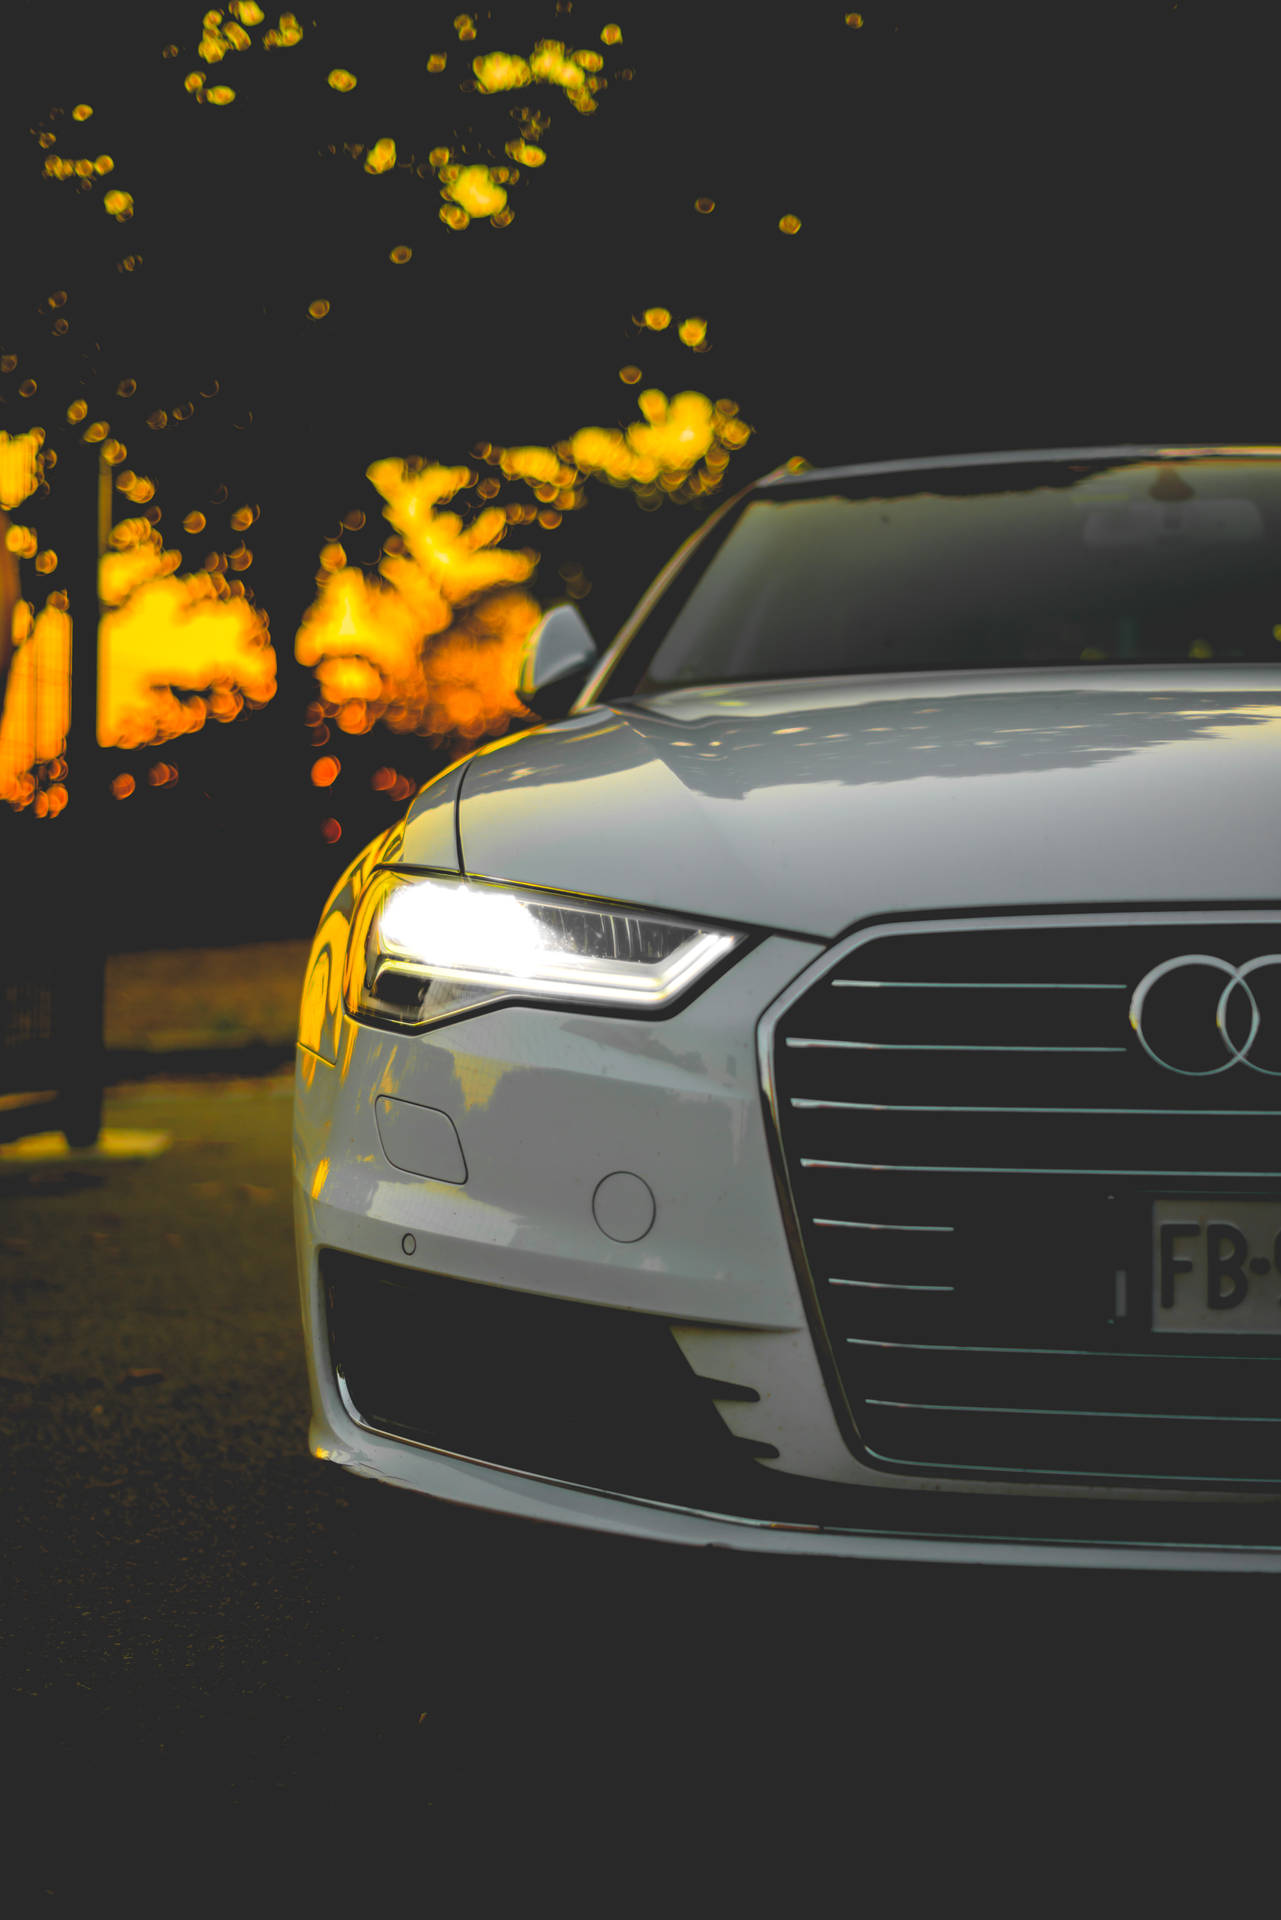 4912X7360 Audi Wallpaper and Background